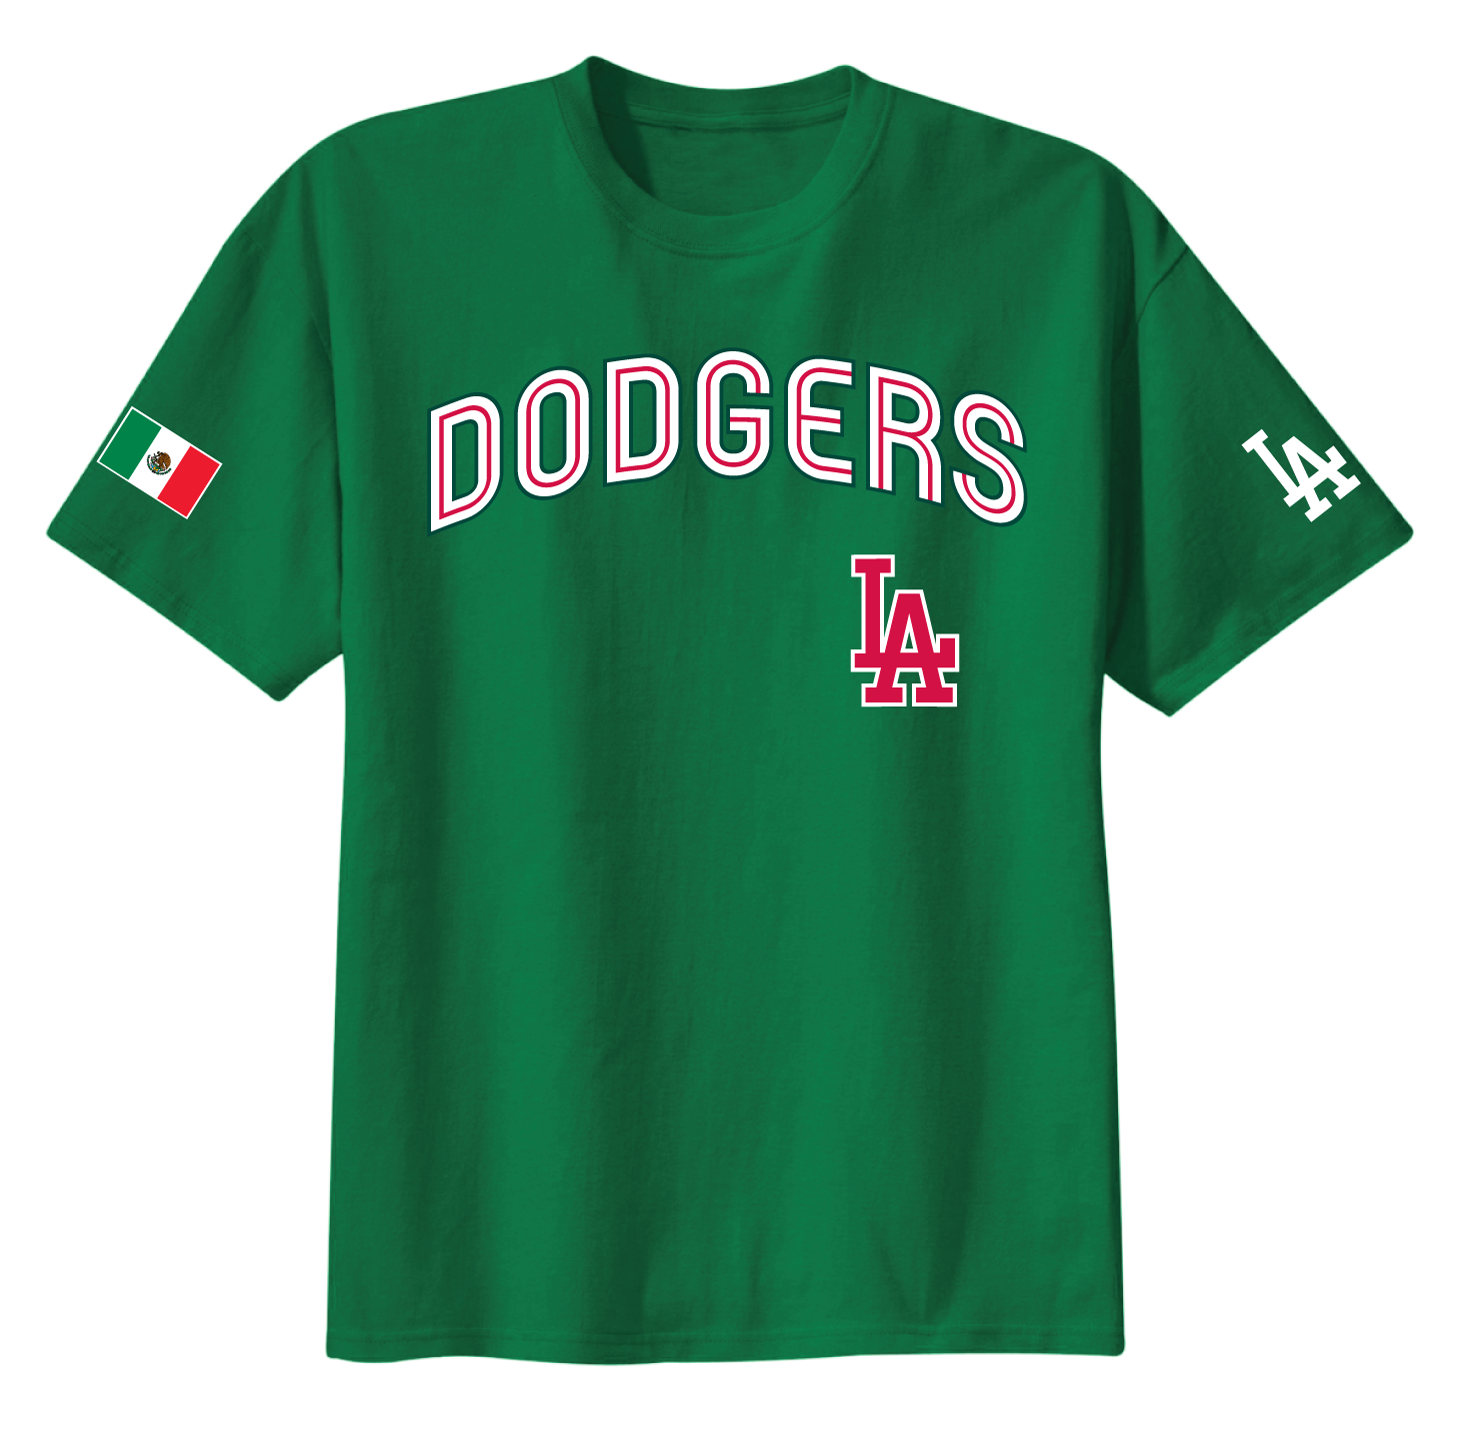 mexican dodger jersey